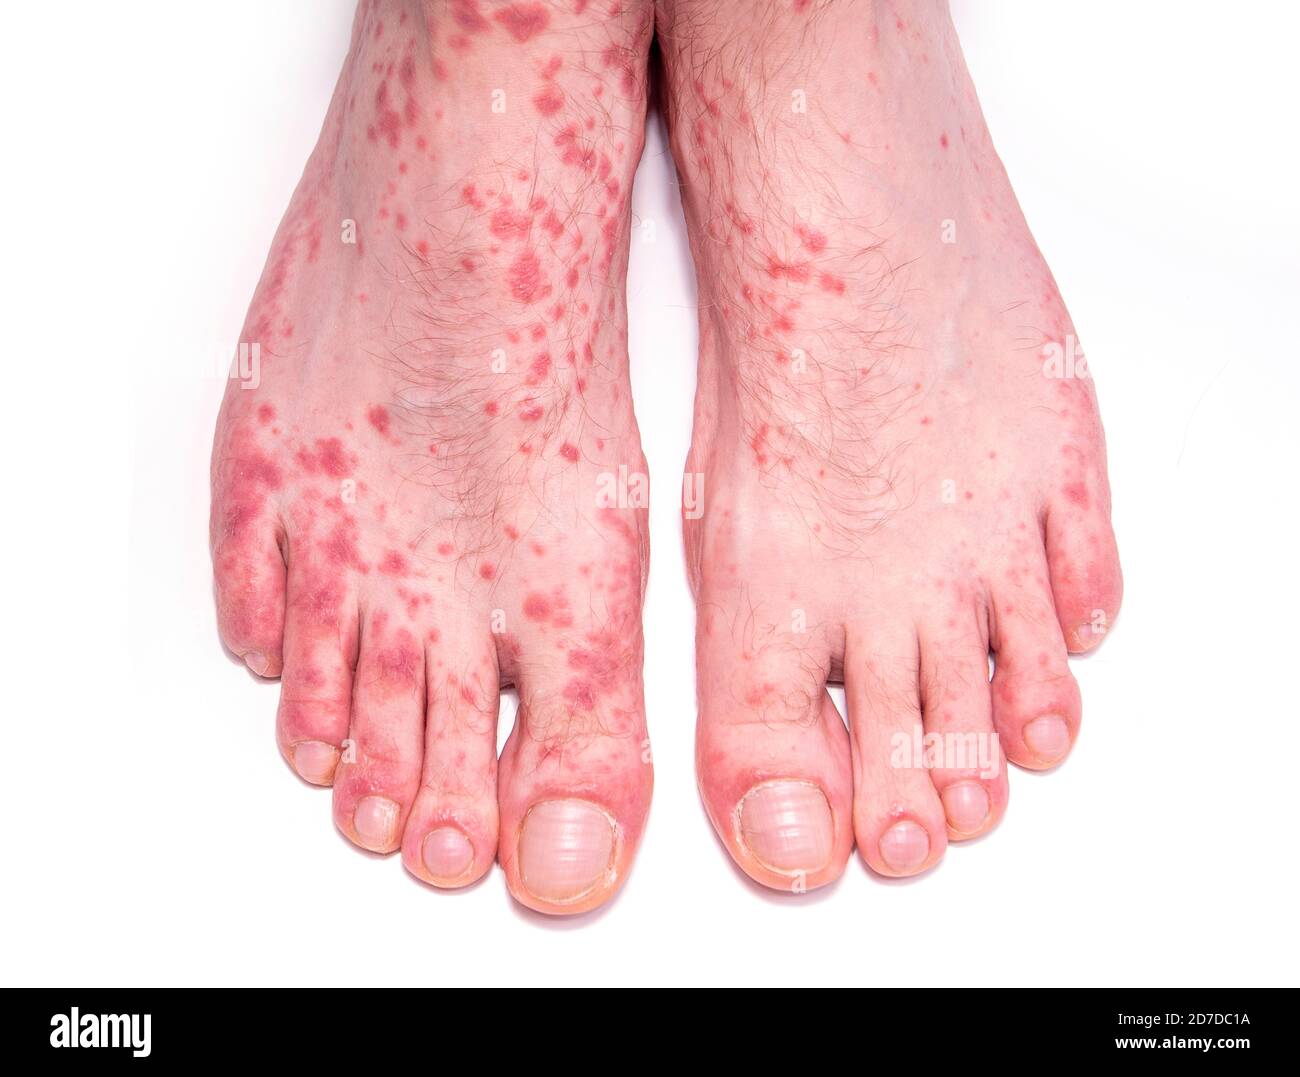 Skin disorder as hives. Human legs with rash isolated on white. Stock Photo